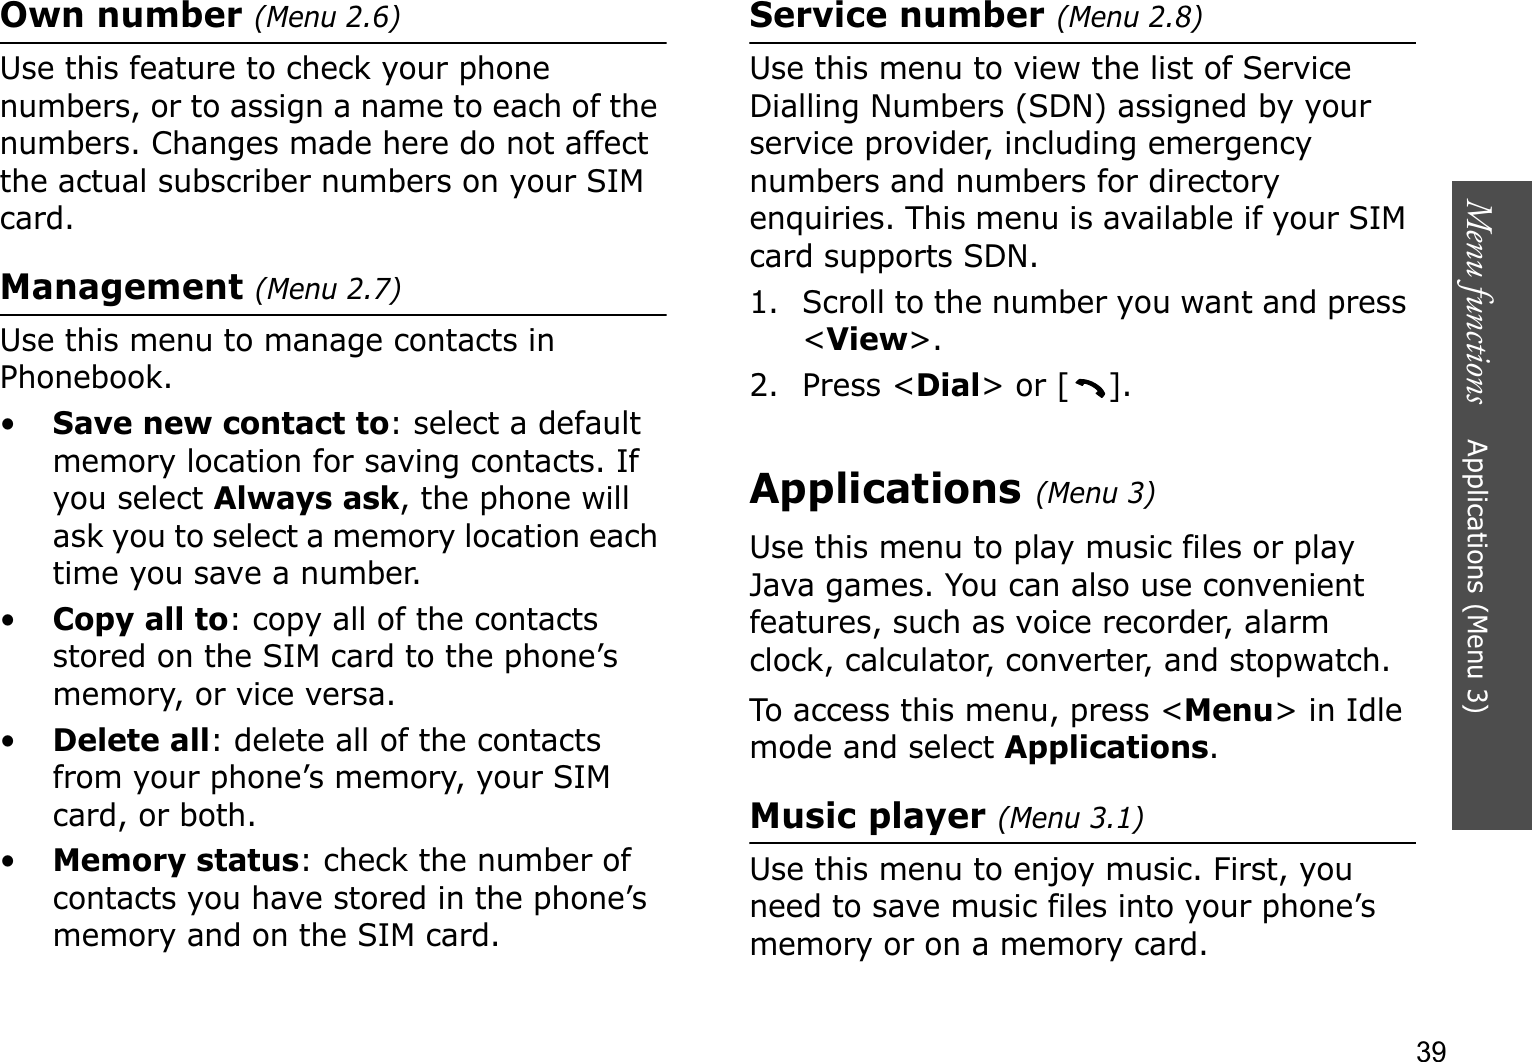 Menu functions    Applications (Menu 3)39Own number (Menu 2.6)Use this feature to check your phone numbers, or to assign a name to each of the numbers. Changes made here do not affect the actual subscriber numbers on your SIM card.Management (Menu 2.7)Use this menu to manage contacts in Phonebook.•Save new contact to: select a default memory location for saving contacts. If you select Always ask, the phone will ask you to select a memory location each time you save a number.•Copy all to: copy all of the contacts stored on the SIM card to the phone’s memory, or vice versa.•Delete all: delete all of the contacts from your phone’s memory, your SIM card, or both.•Memory status: check the number of contacts you have stored in the phone’s memory and on the SIM card.Service number (Menu 2.8)Use this menu to view the list of Service Dialling Numbers (SDN) assigned by your service provider, including emergency numbers and numbers for directory enquiries. This menu is available if your SIM card supports SDN.1. Scroll to the number you want and press &lt;View&gt;.2. Press &lt;Dial&gt; or [ ].Applications (Menu 3)Use this menu to play music files or play Java games. You can also use convenient features, such as voice recorder, alarm clock, calculator, converter, and stopwatch.To access this menu, press &lt;Menu&gt; in Idle mode and select Applications.Music player (Menu 3.1)Use this menu to enjoy music. First, you need to save music files into your phone’s memory or on a memory card.